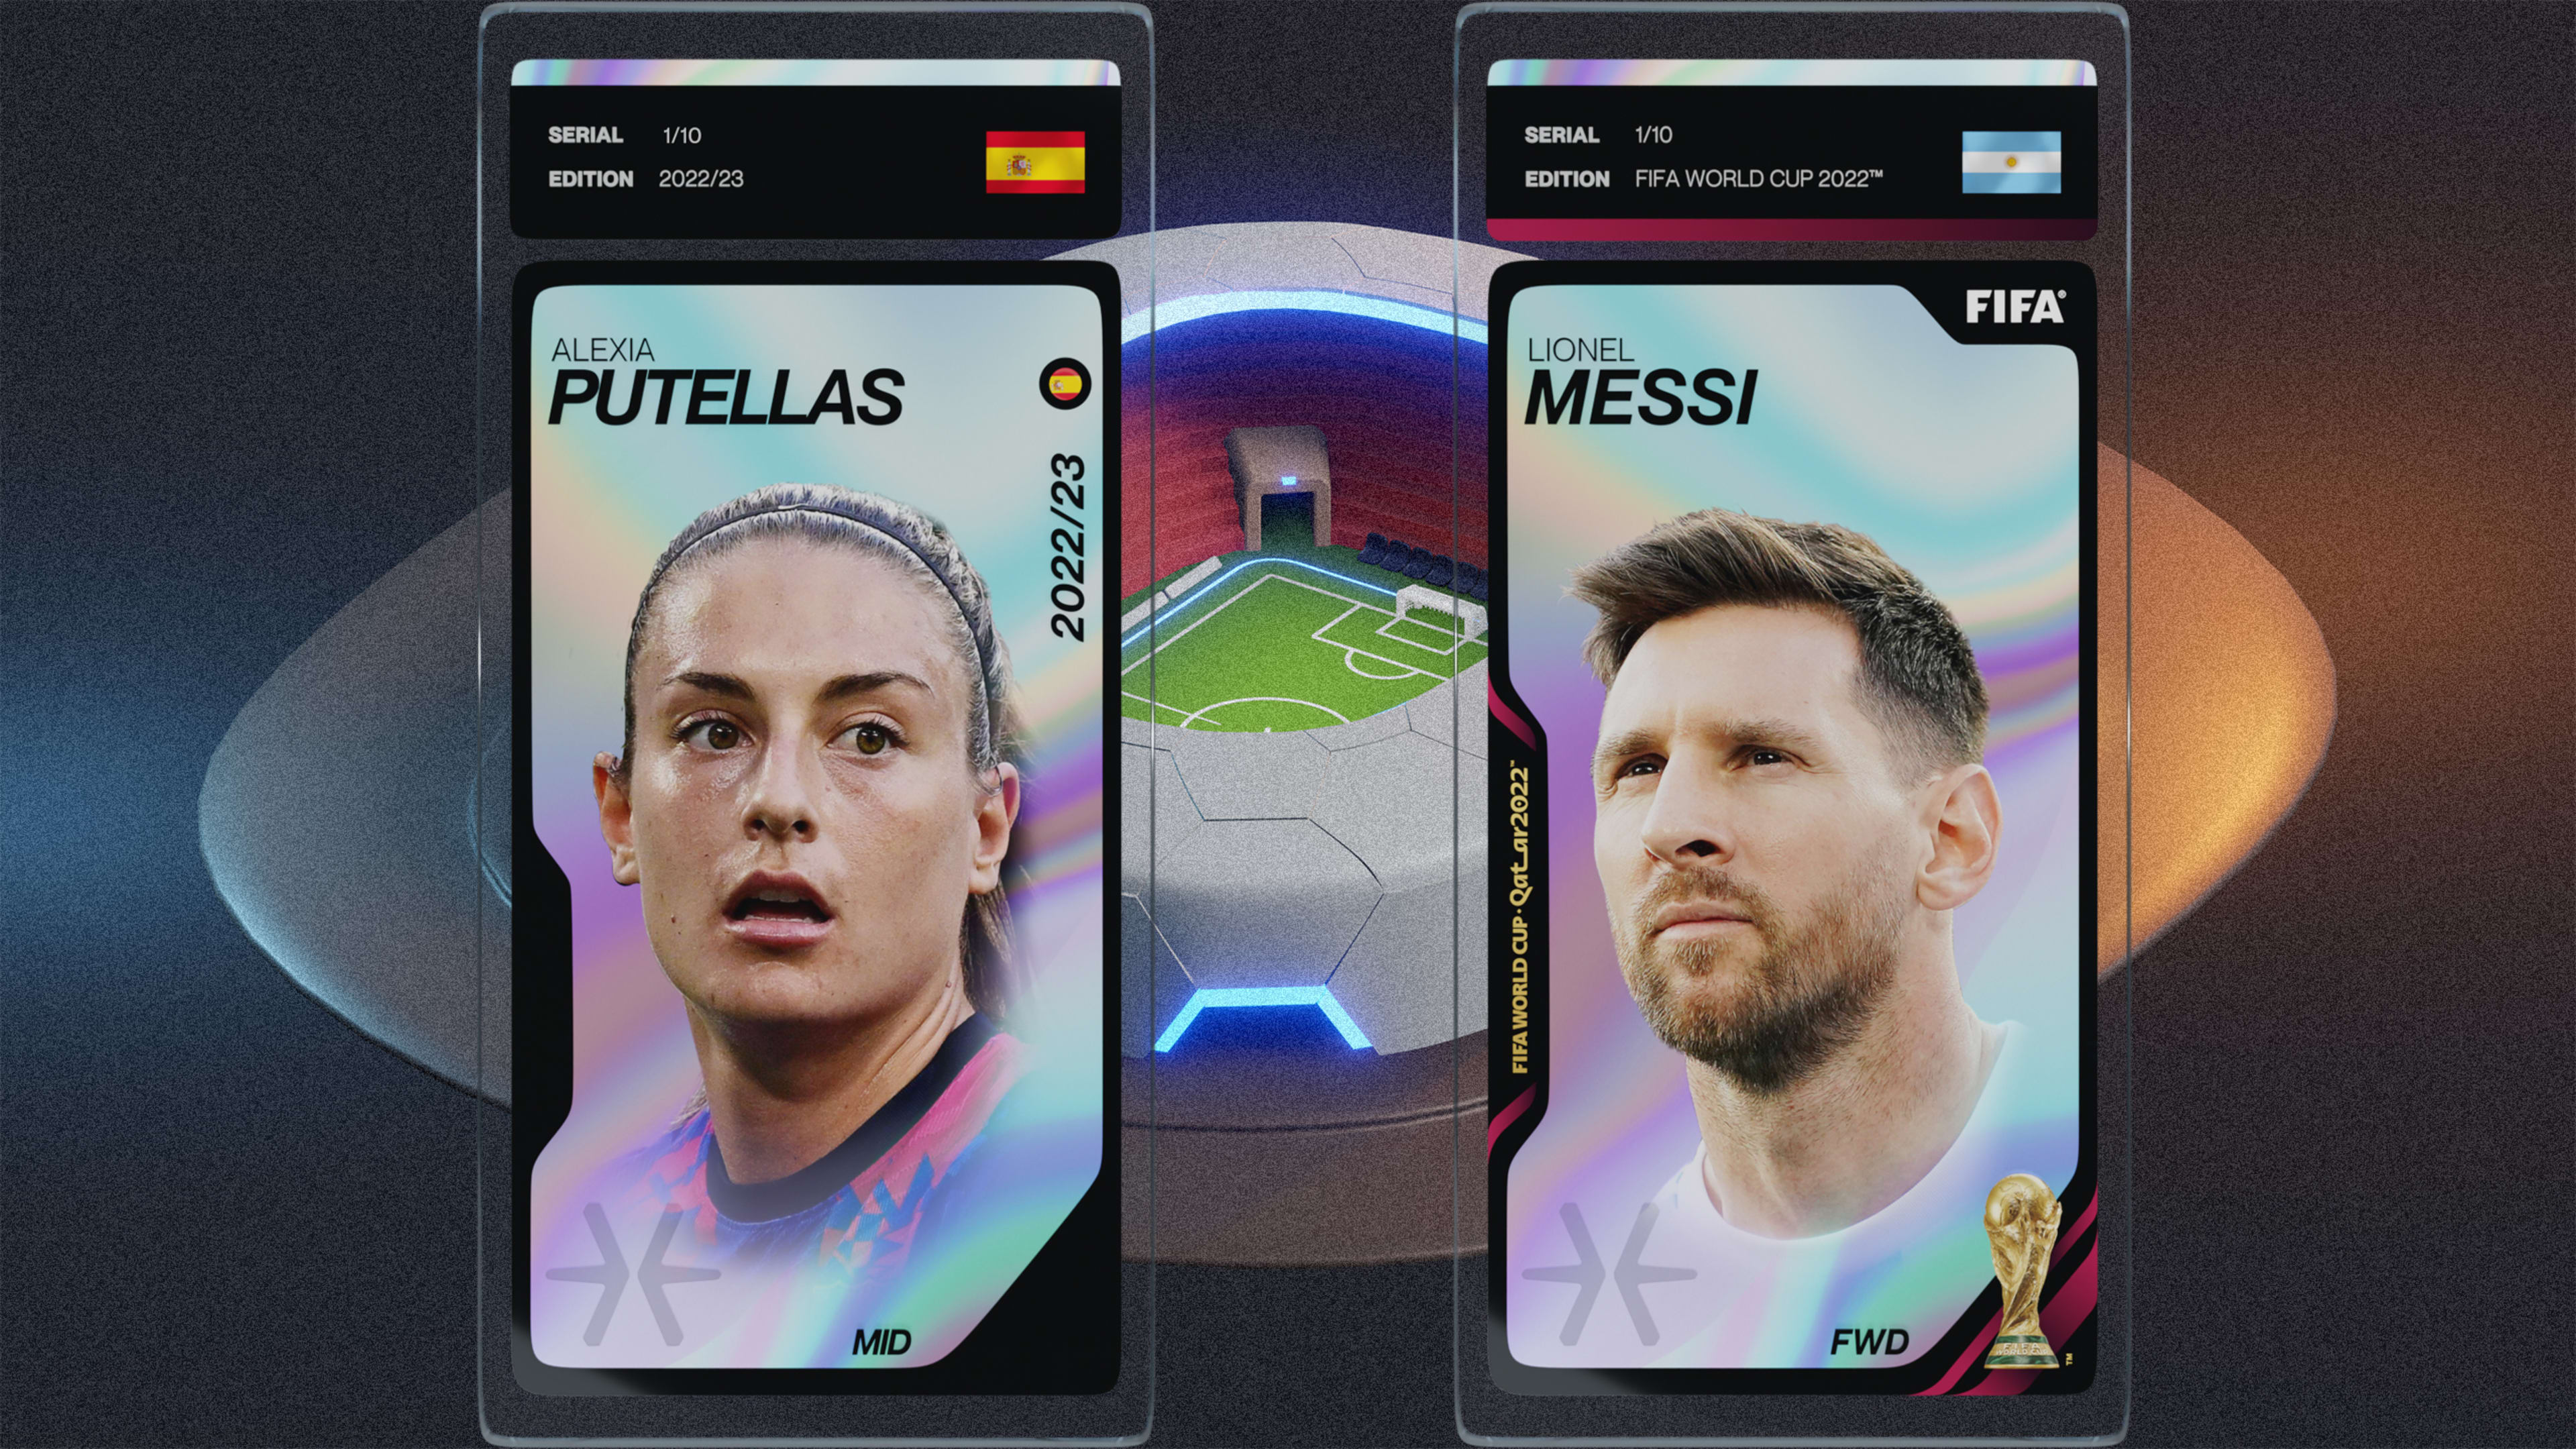 Lionel Messi’s tech investment firm Play Time is betting big on this mobile gaming startup